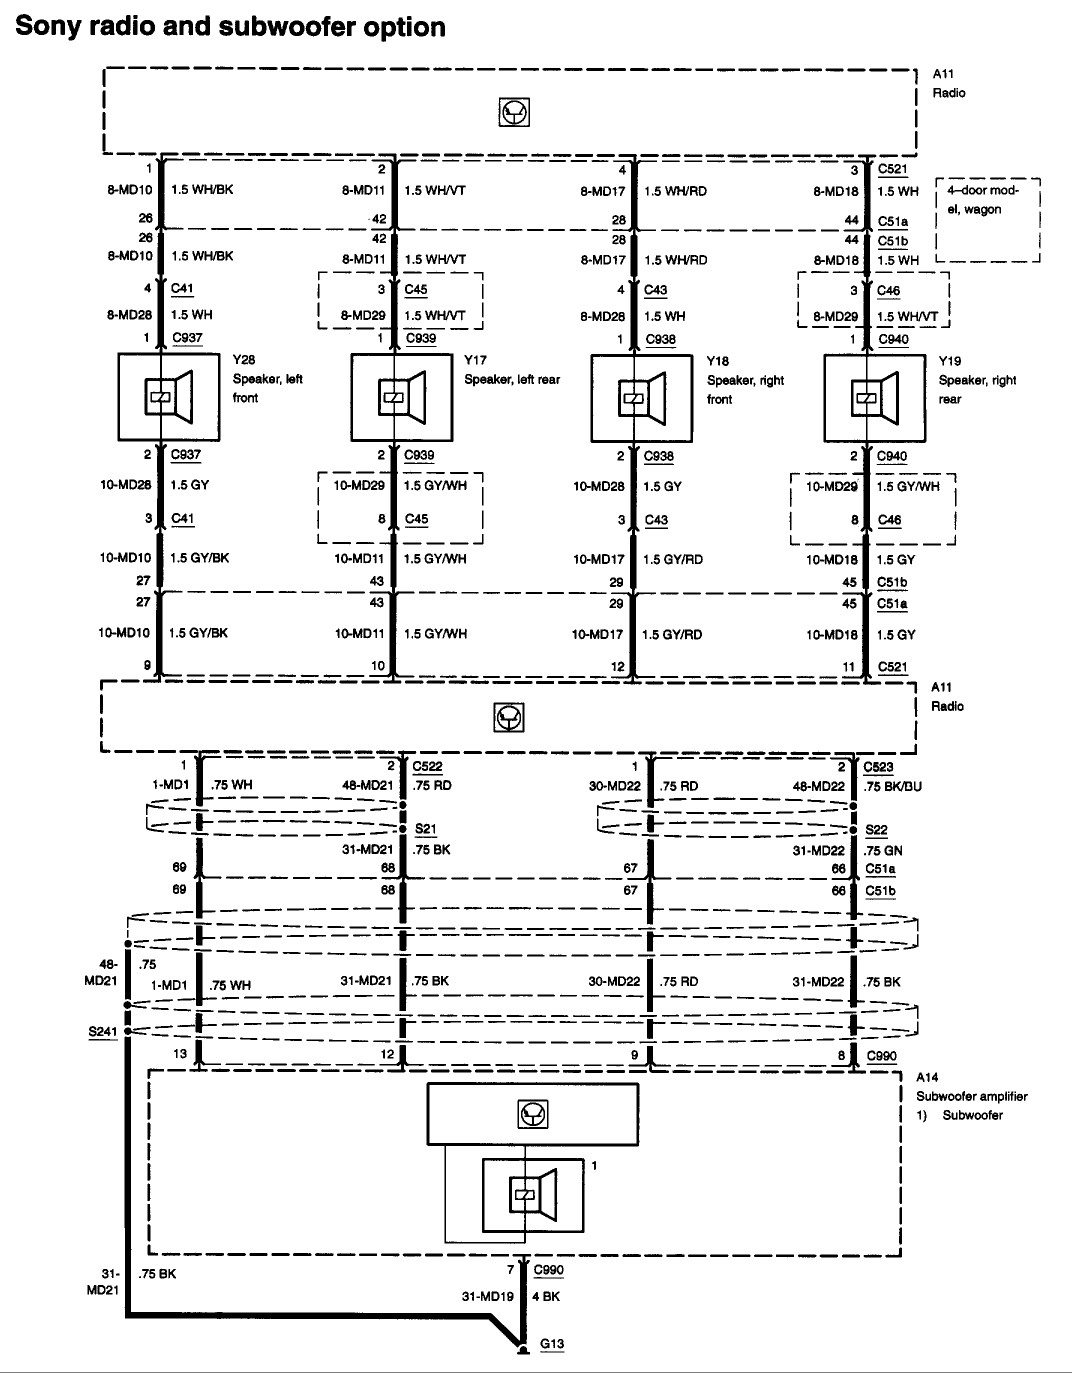 2003 ford Focus Radio Wiring Diagram Floralfrocks and Autoctono 2006 ford Escape Stereo Wiring Diagram